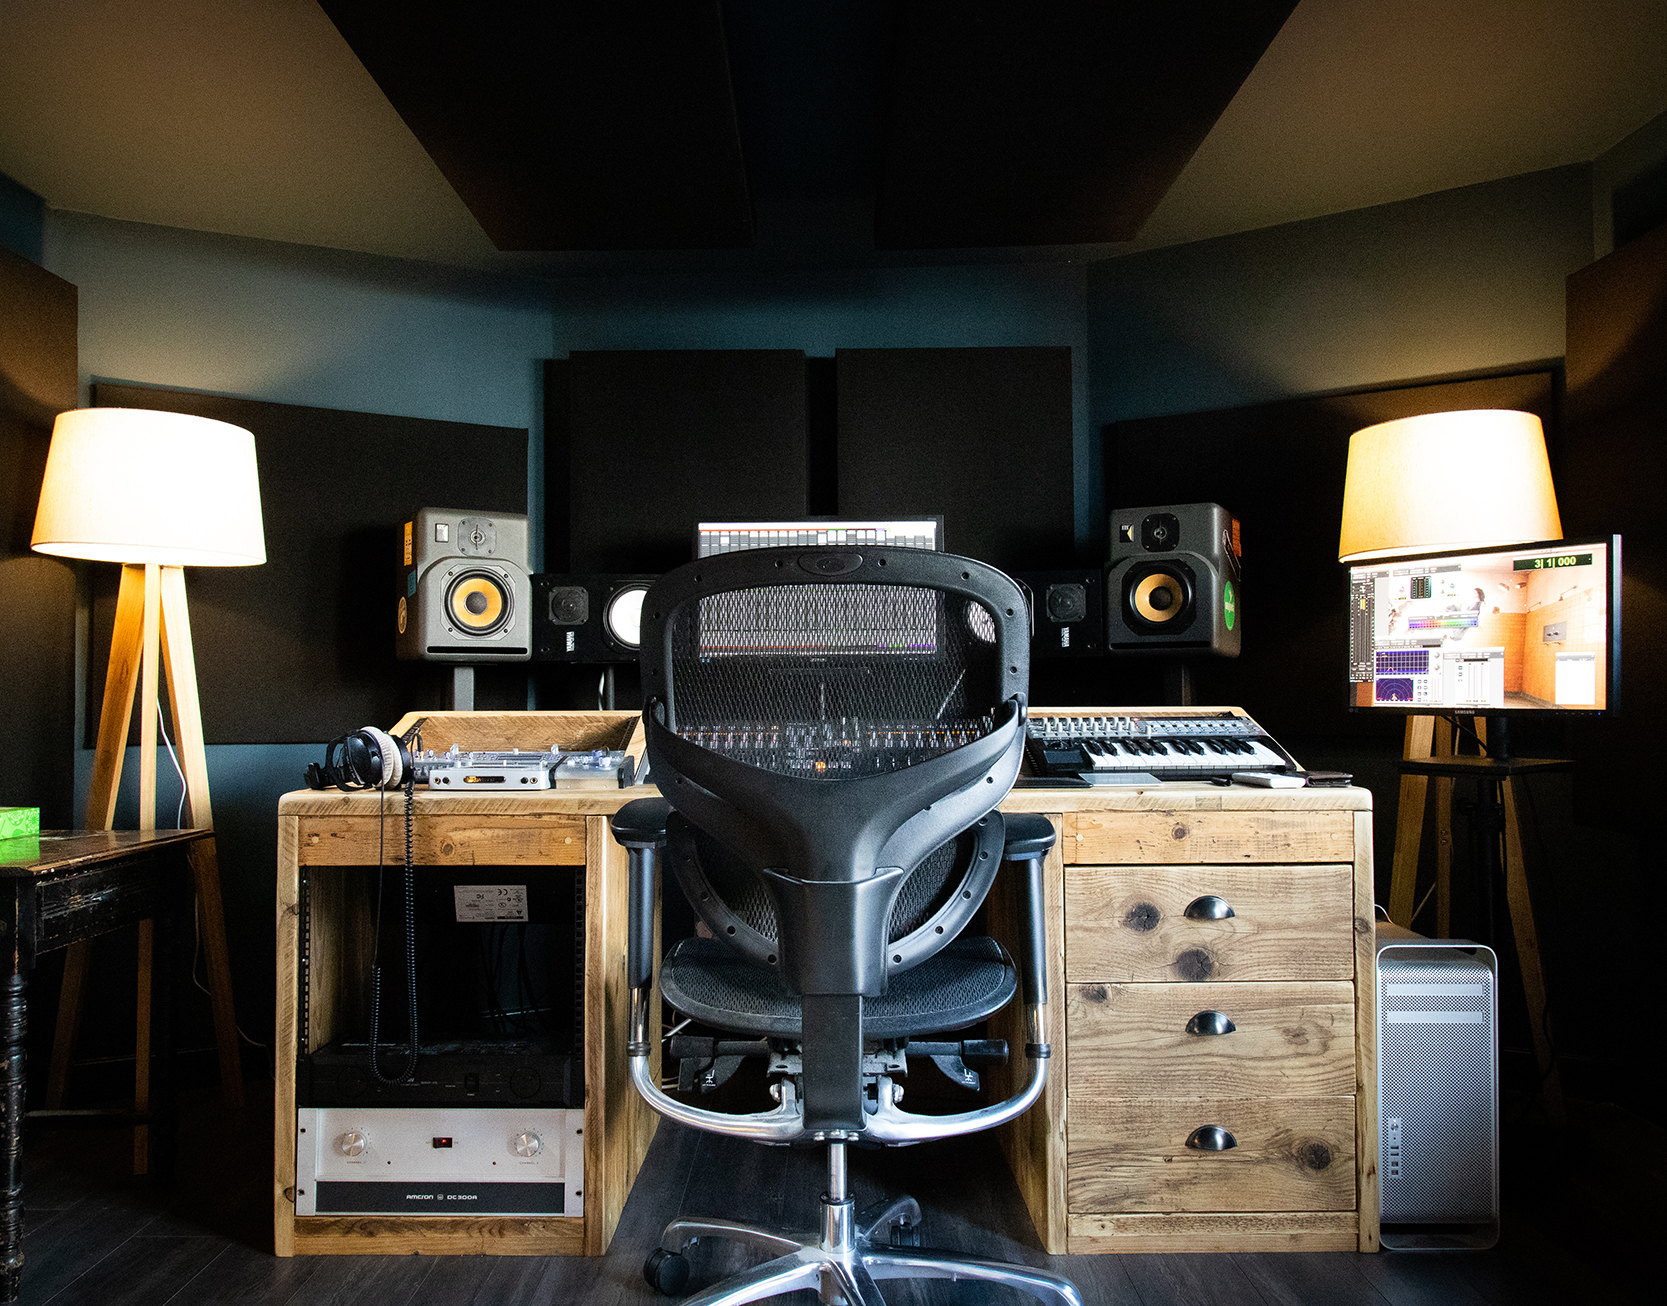 Full view of a Vivid Green garden music studio's desk and technical equipment with a screen and speakers mounted above, warm light lamps on either side, and soundproofing on walls and roof.